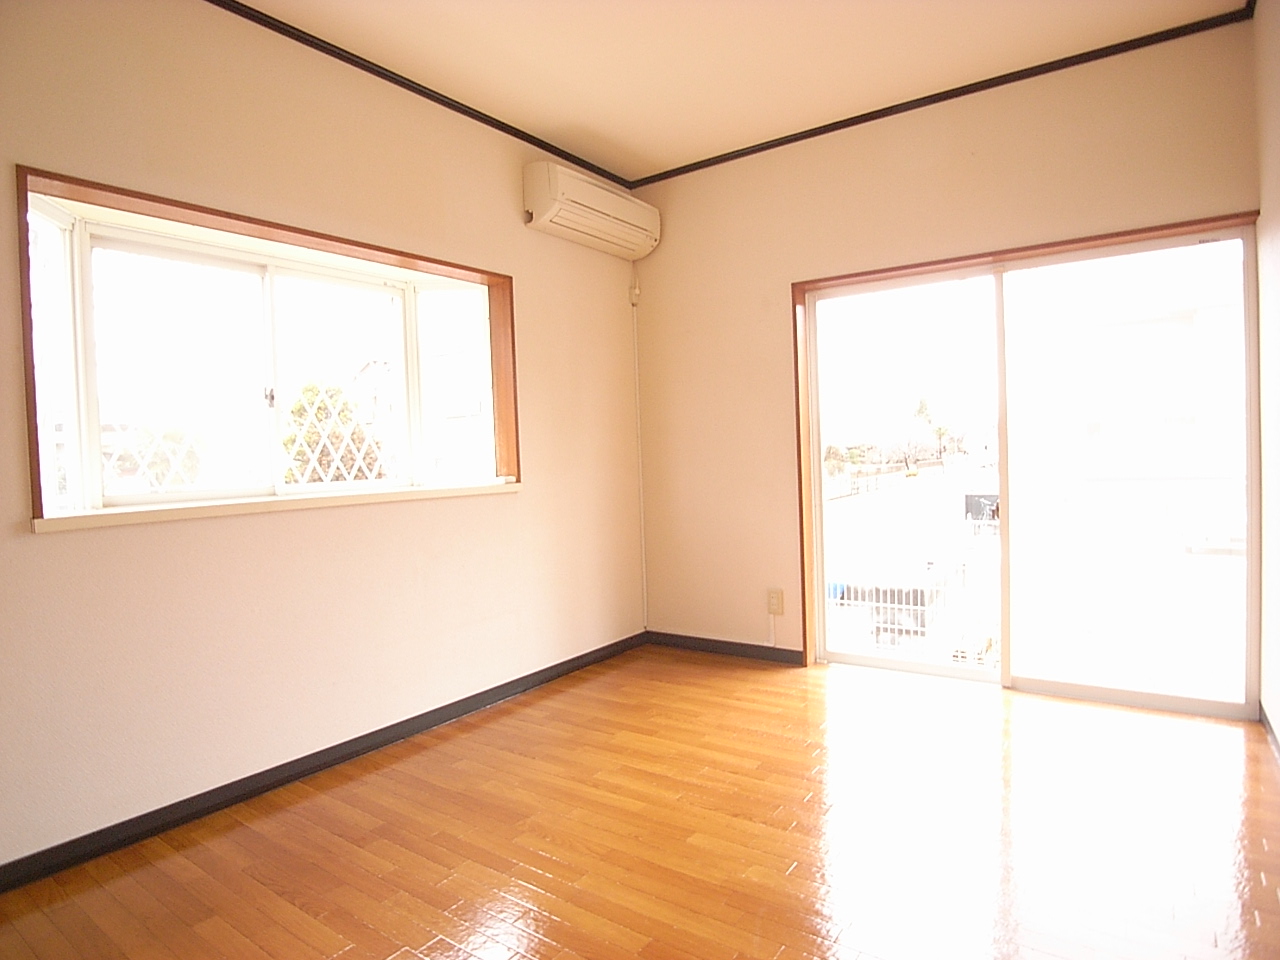 Living and room. Corner room ・ Good bay window ventilation day ・ Air conditioning